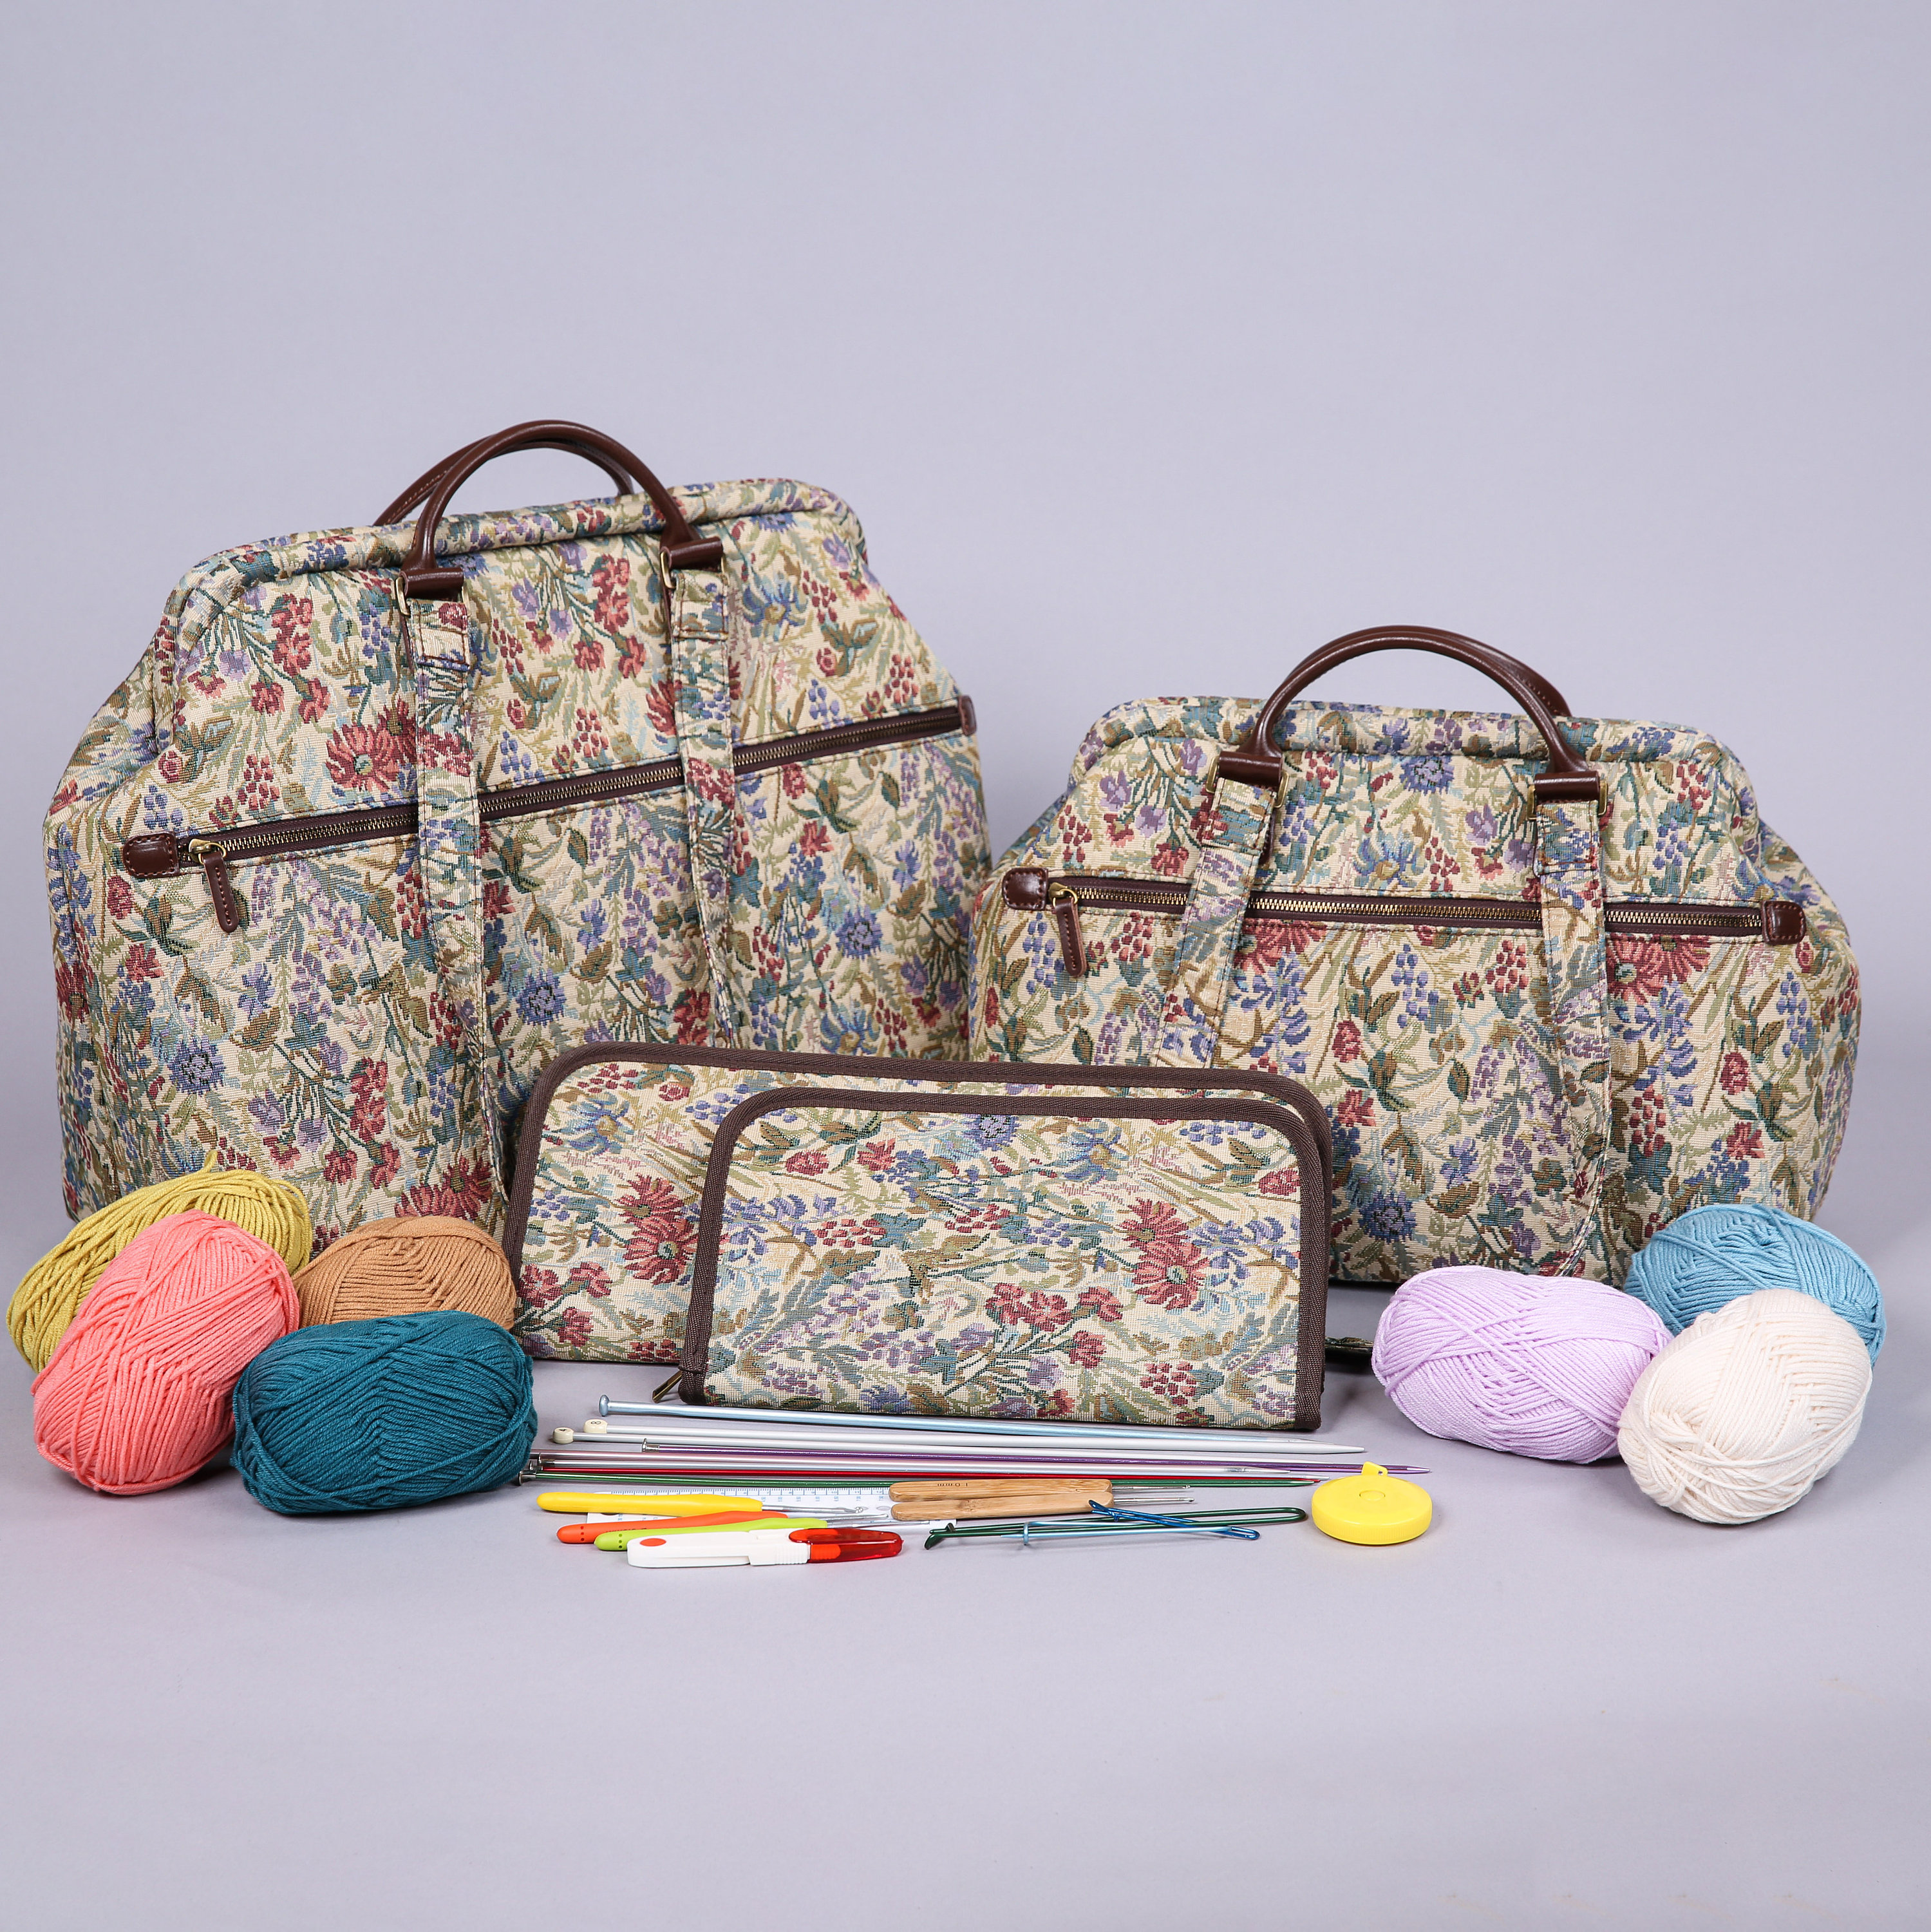 My Knitting Notions Storage: Like Mary Poppins' Carpet Bag, Only Less  Organized – All She Wants To Do Is Knit